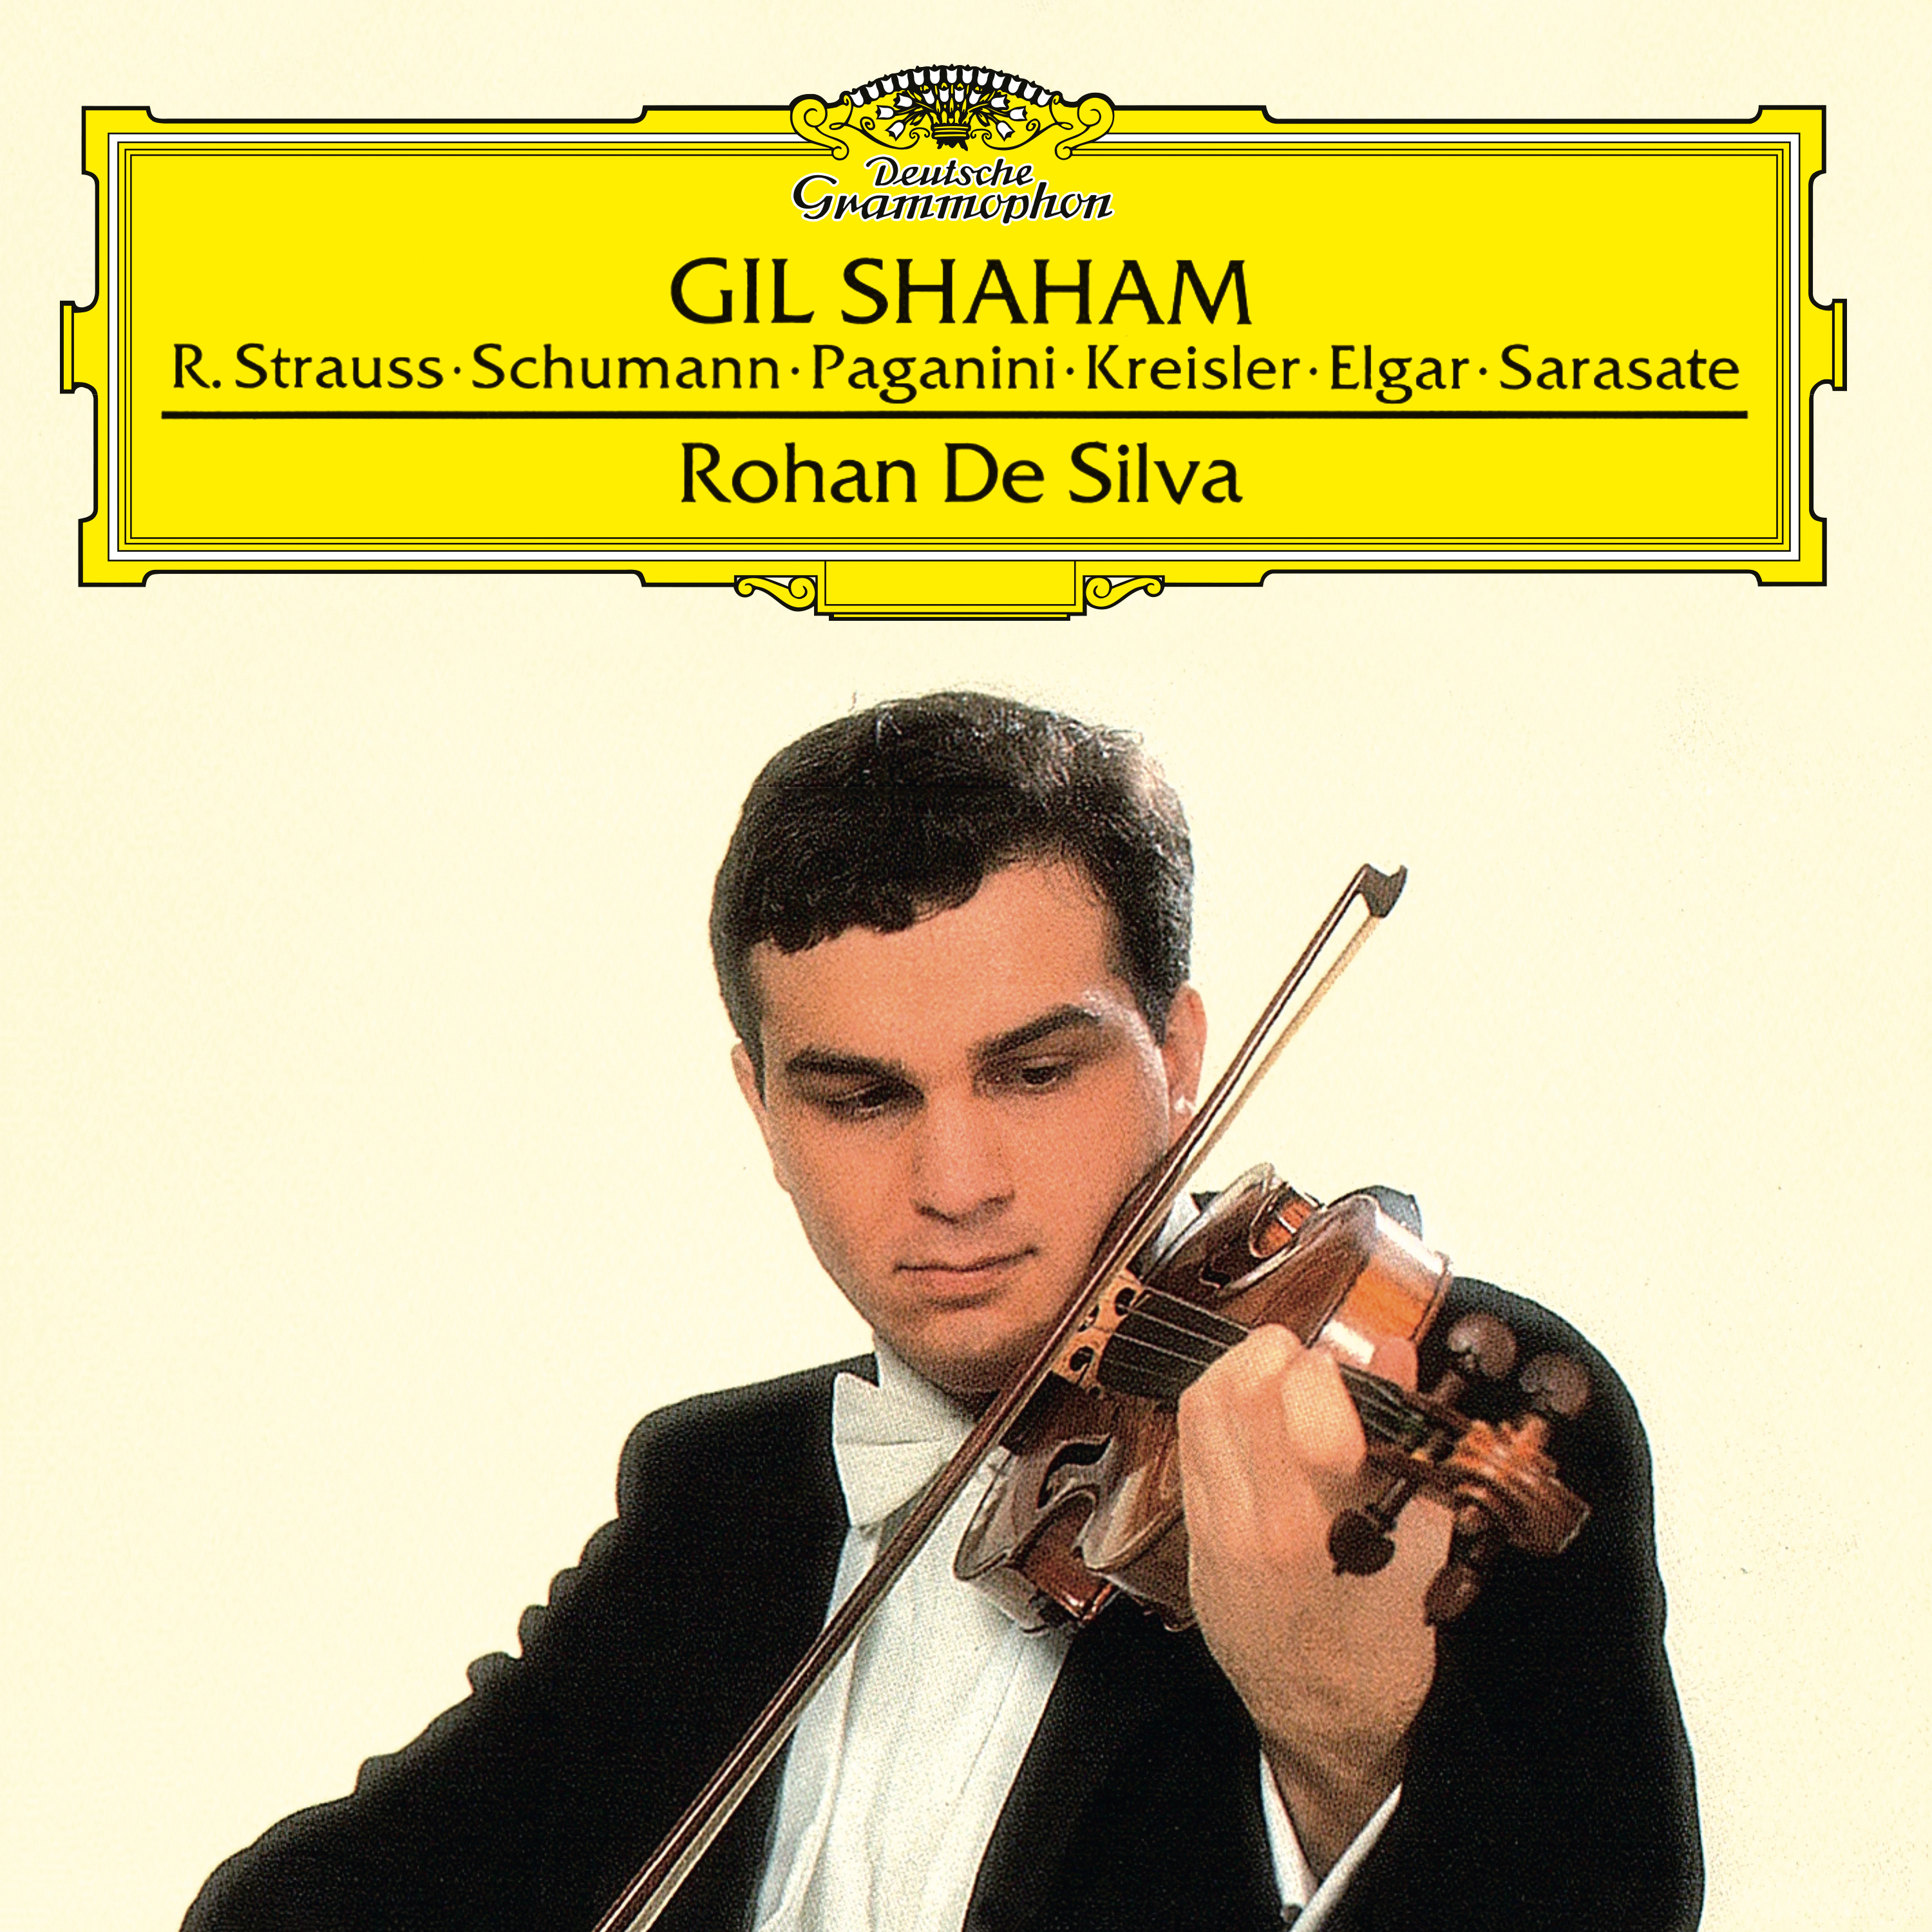 24 Caprices for Violin, Op.1 - transcribed for violin and piano by Robert Schumann:No. 1 in E flat major